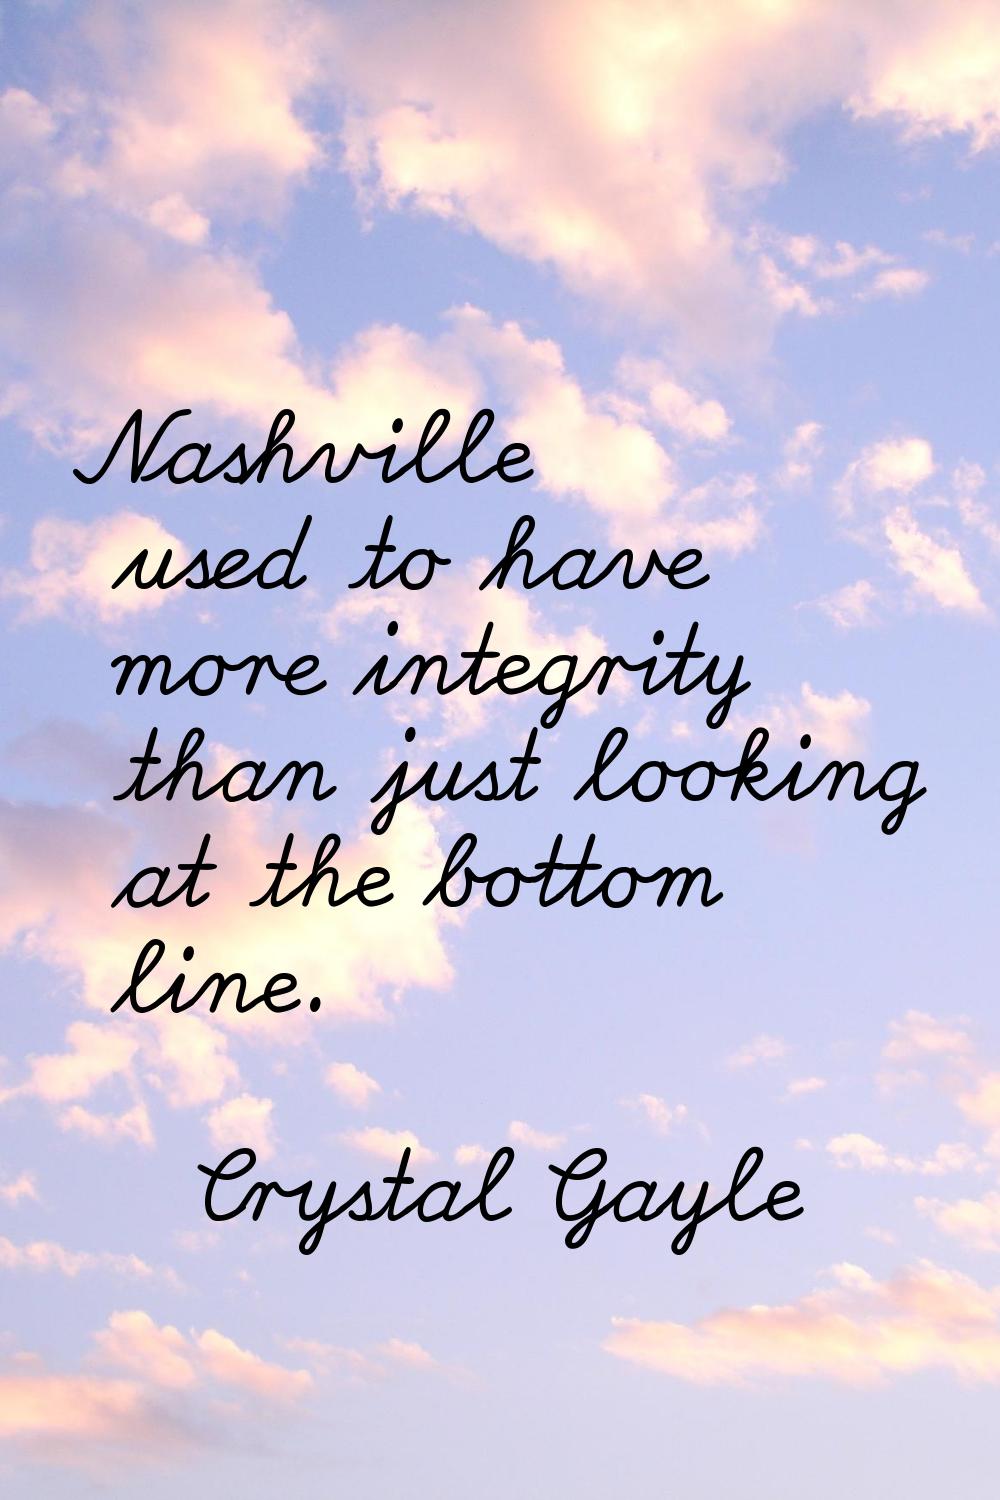 Nashville used to have more integrity than just looking at the bottom line.